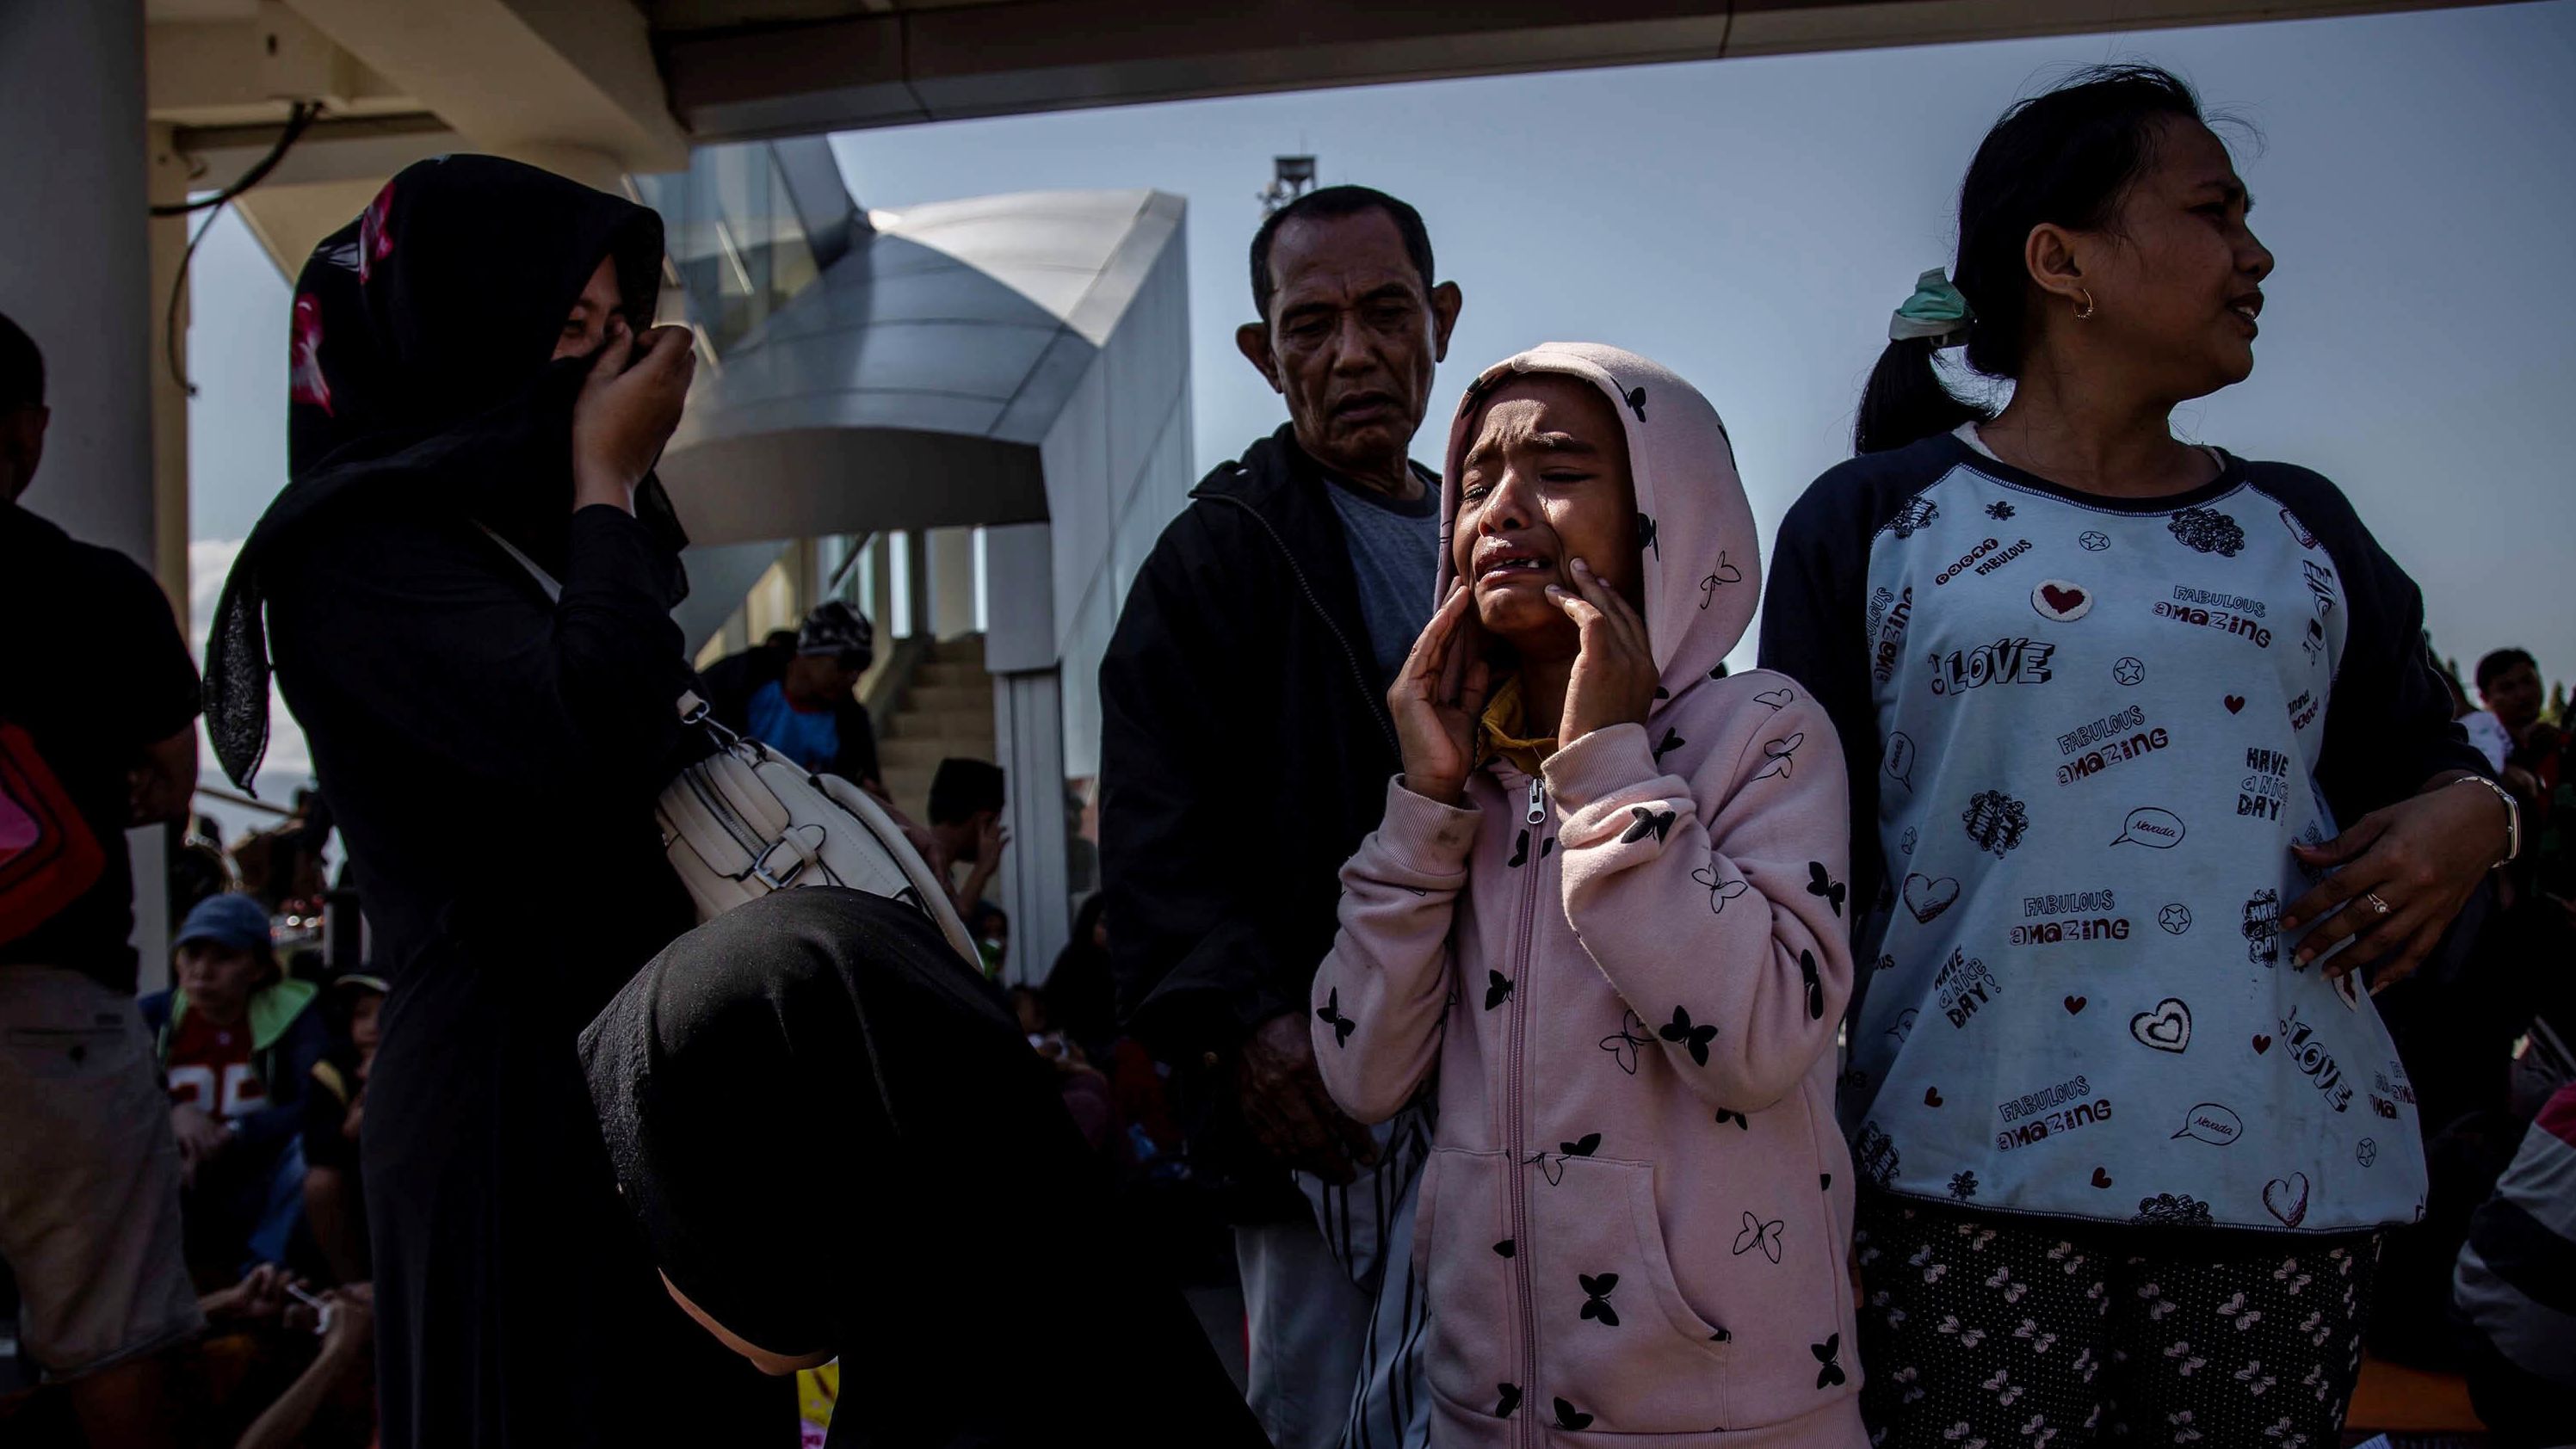 A young girl cries outside the Palu airport after it reopened on October 1. Hundreds rushed to the airport hoping to catch one of the few flights out of the area.